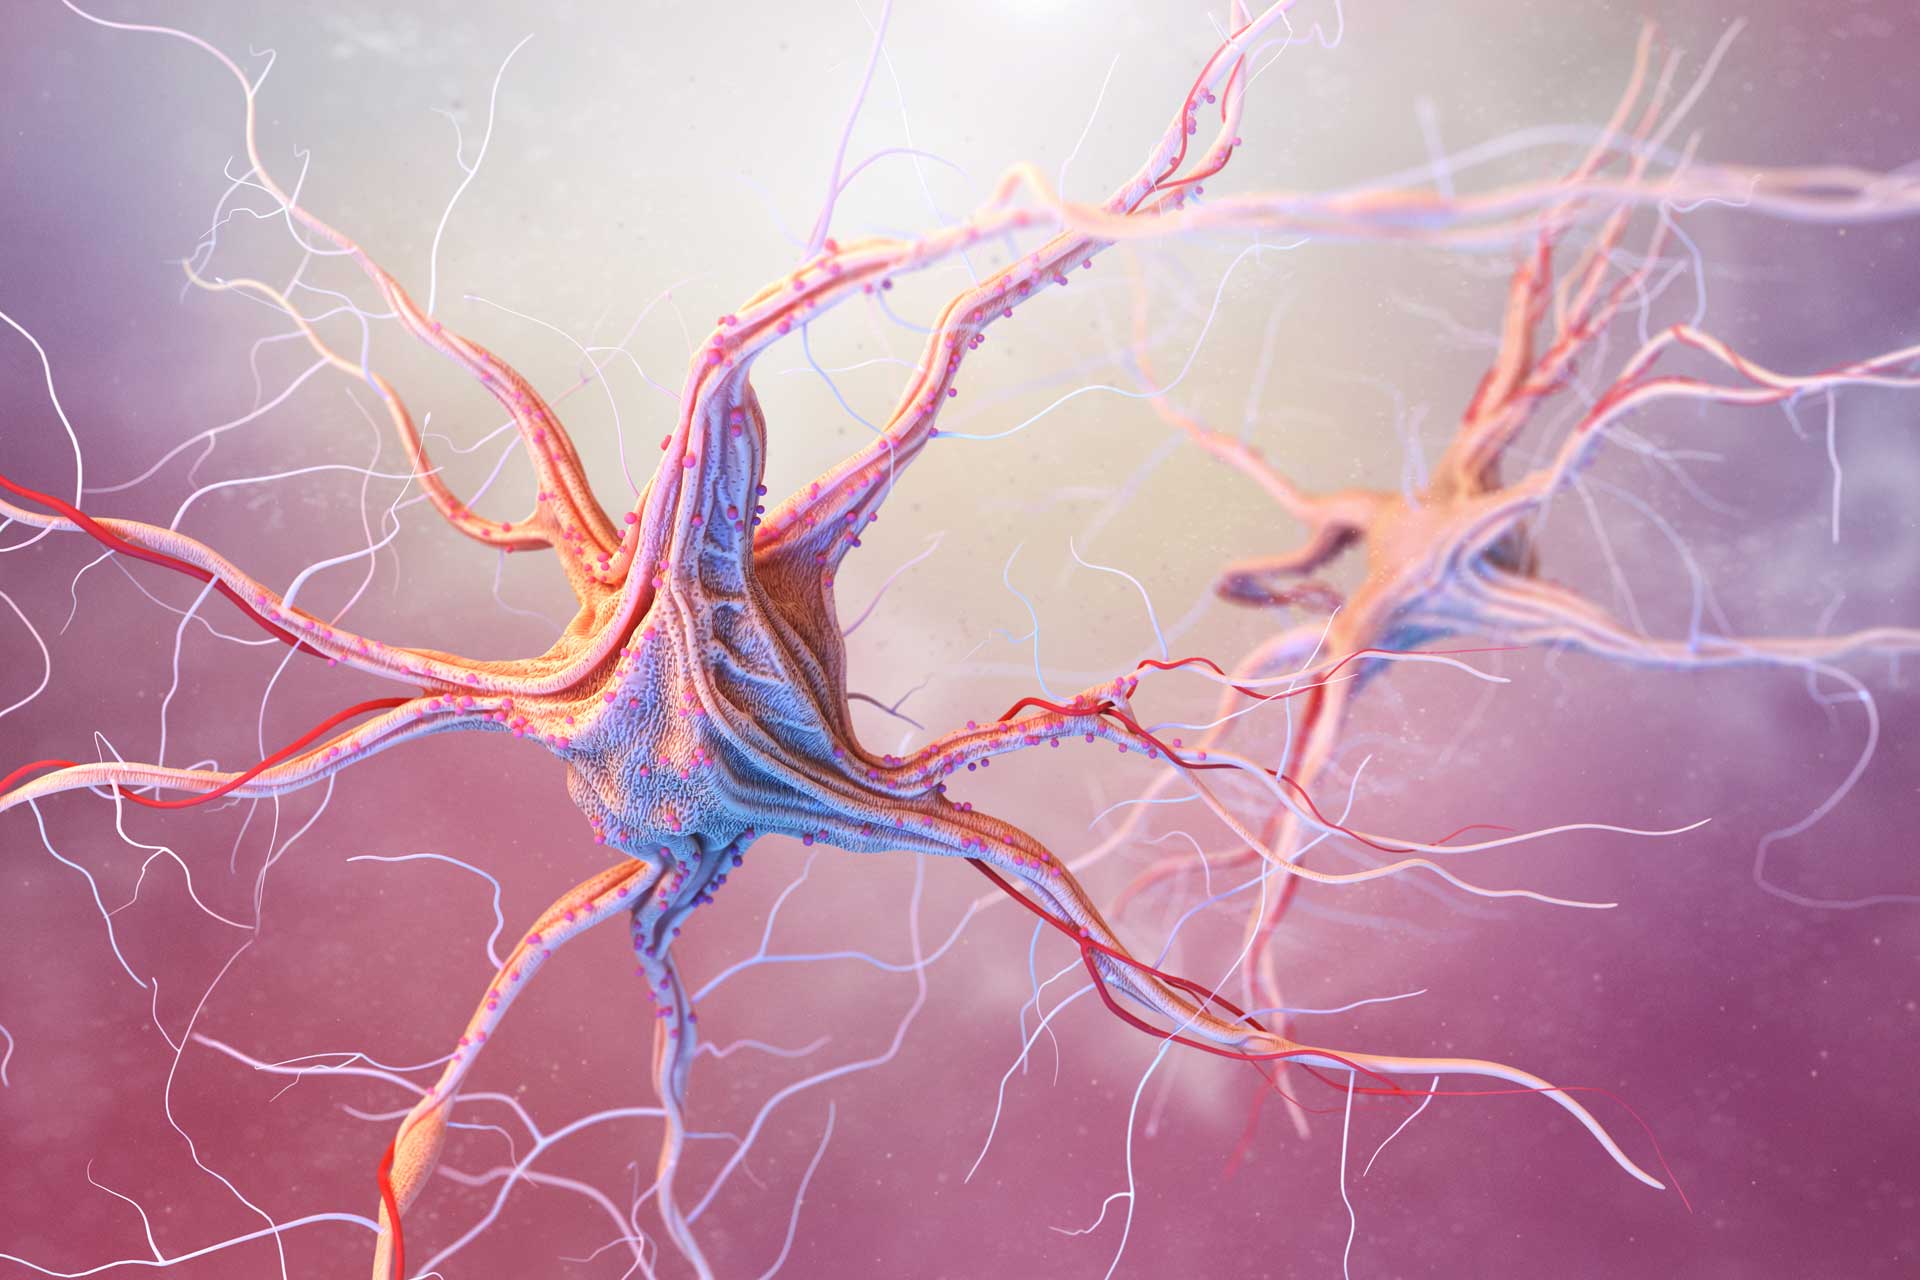 image of a nerve cell within the body